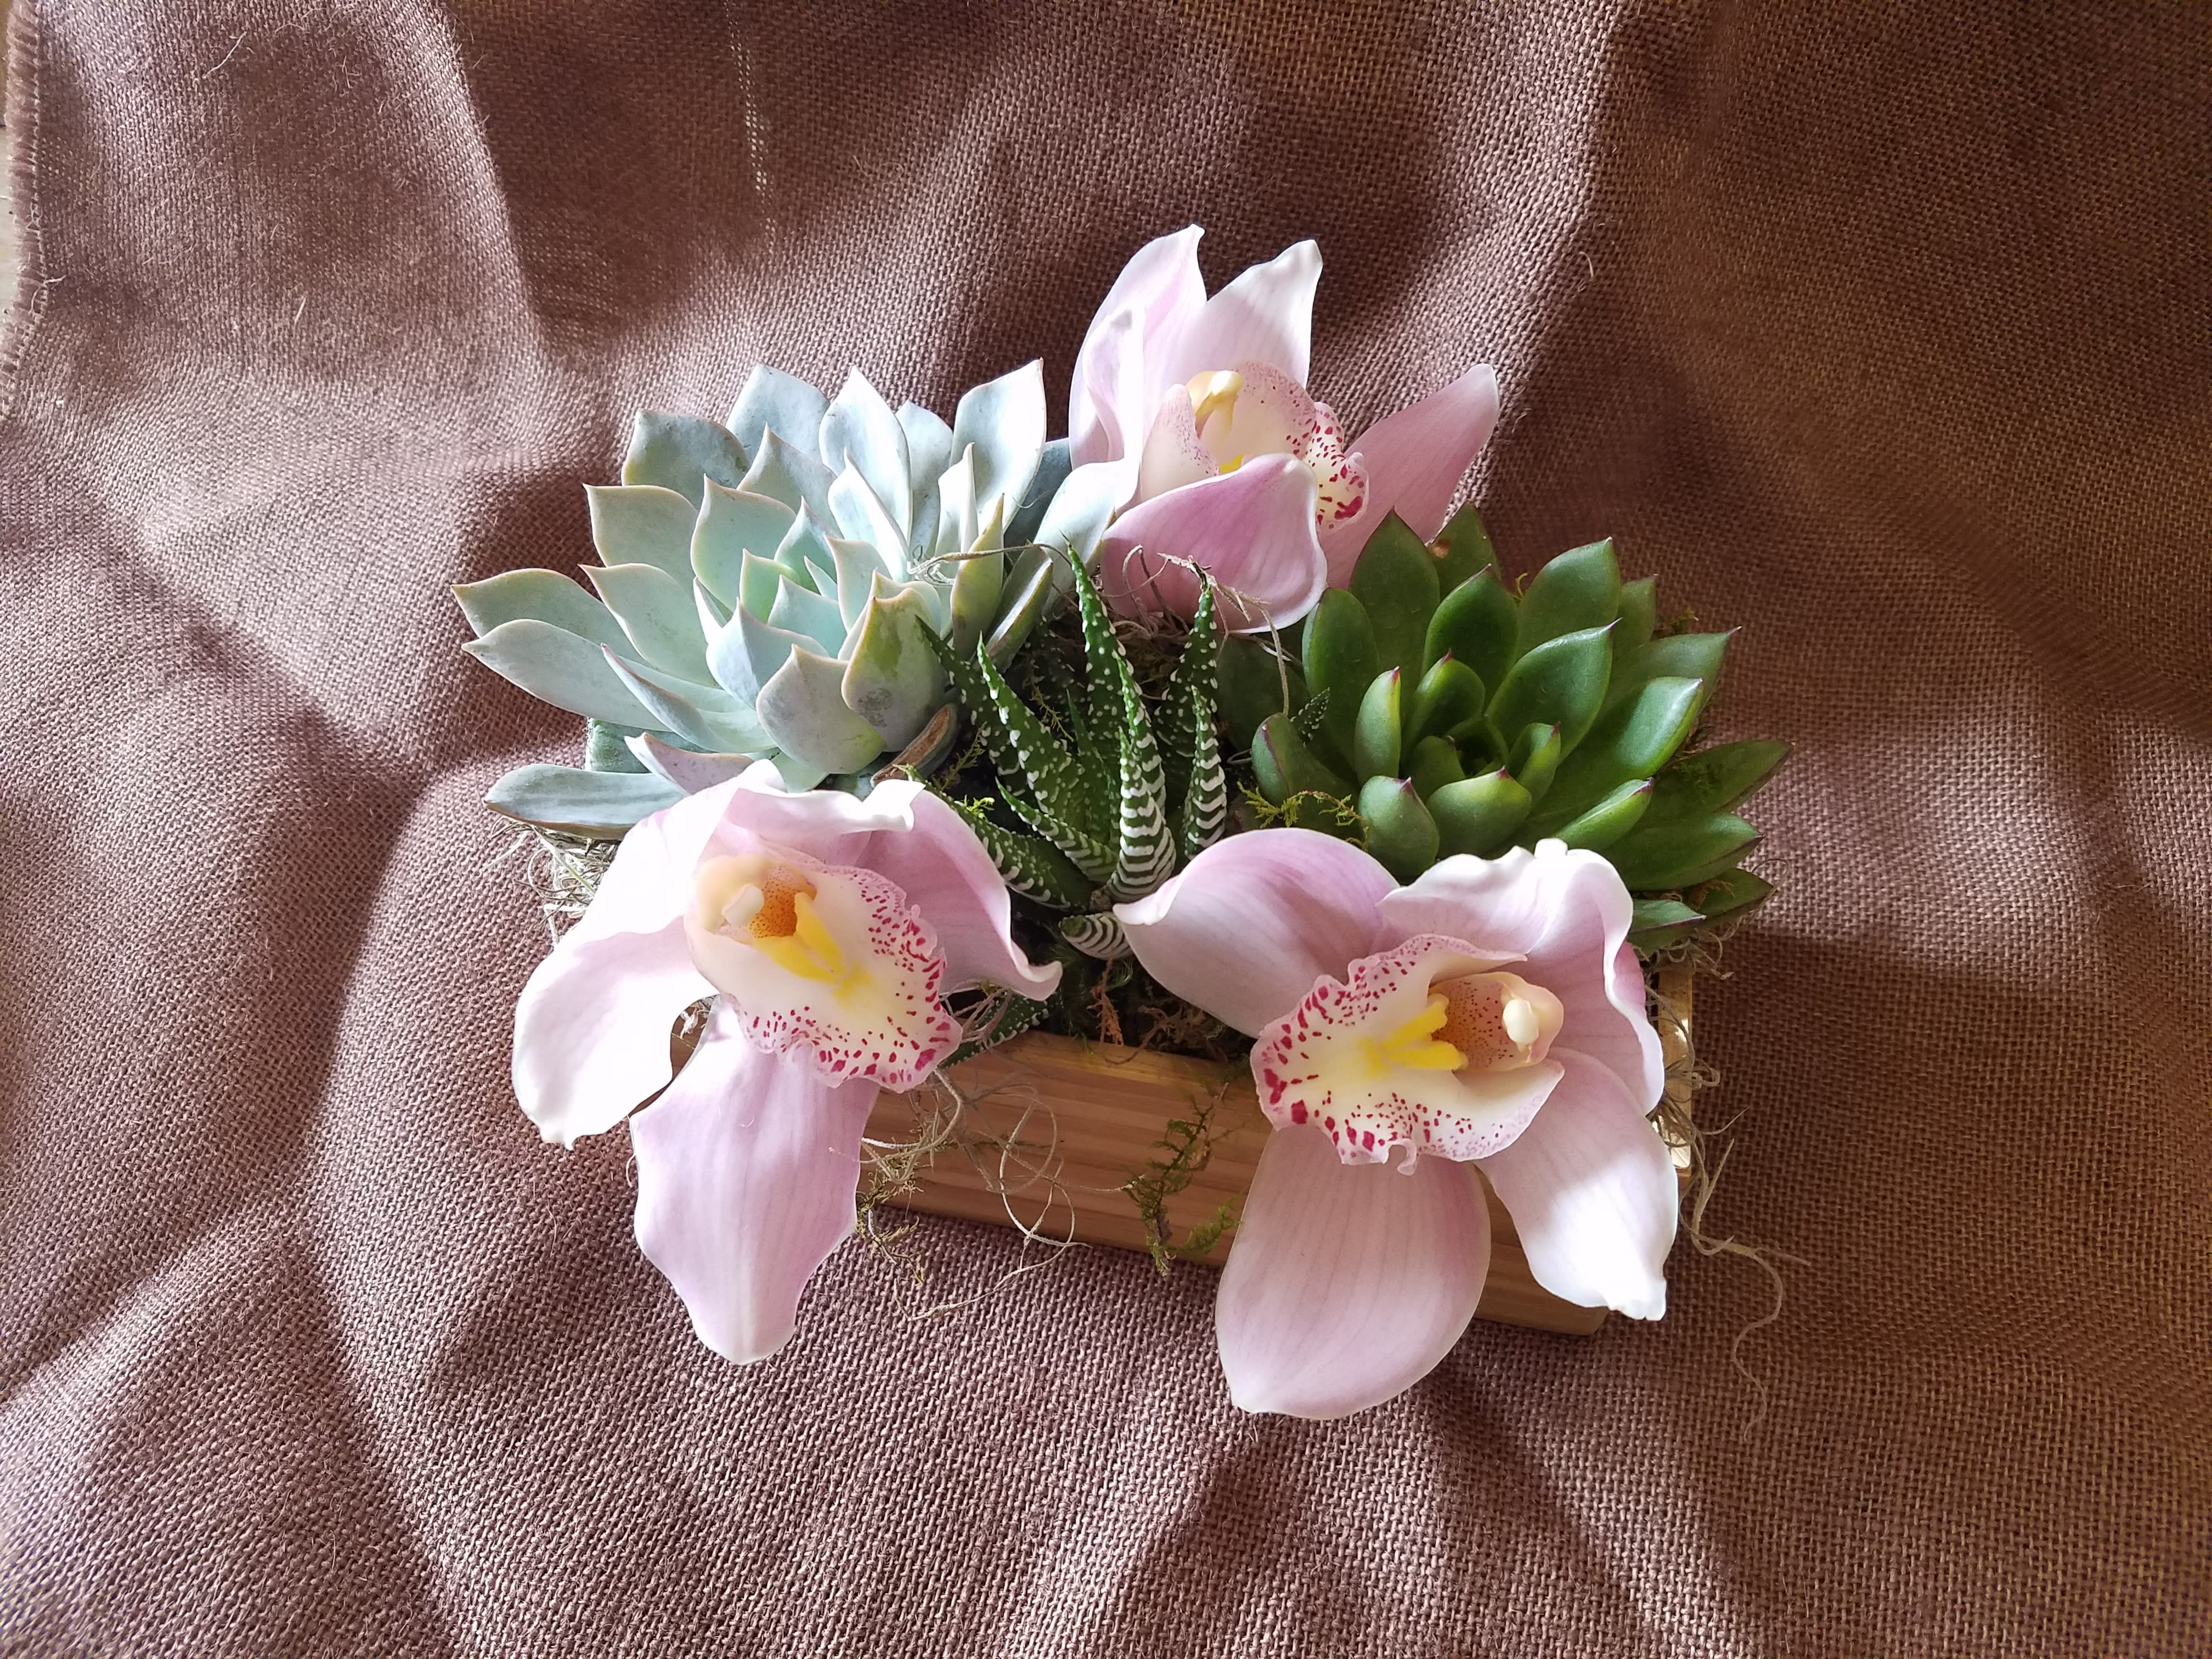 Pink Succulent Trio - A beautiful trio of succulents accented with pink cymbidium orchids